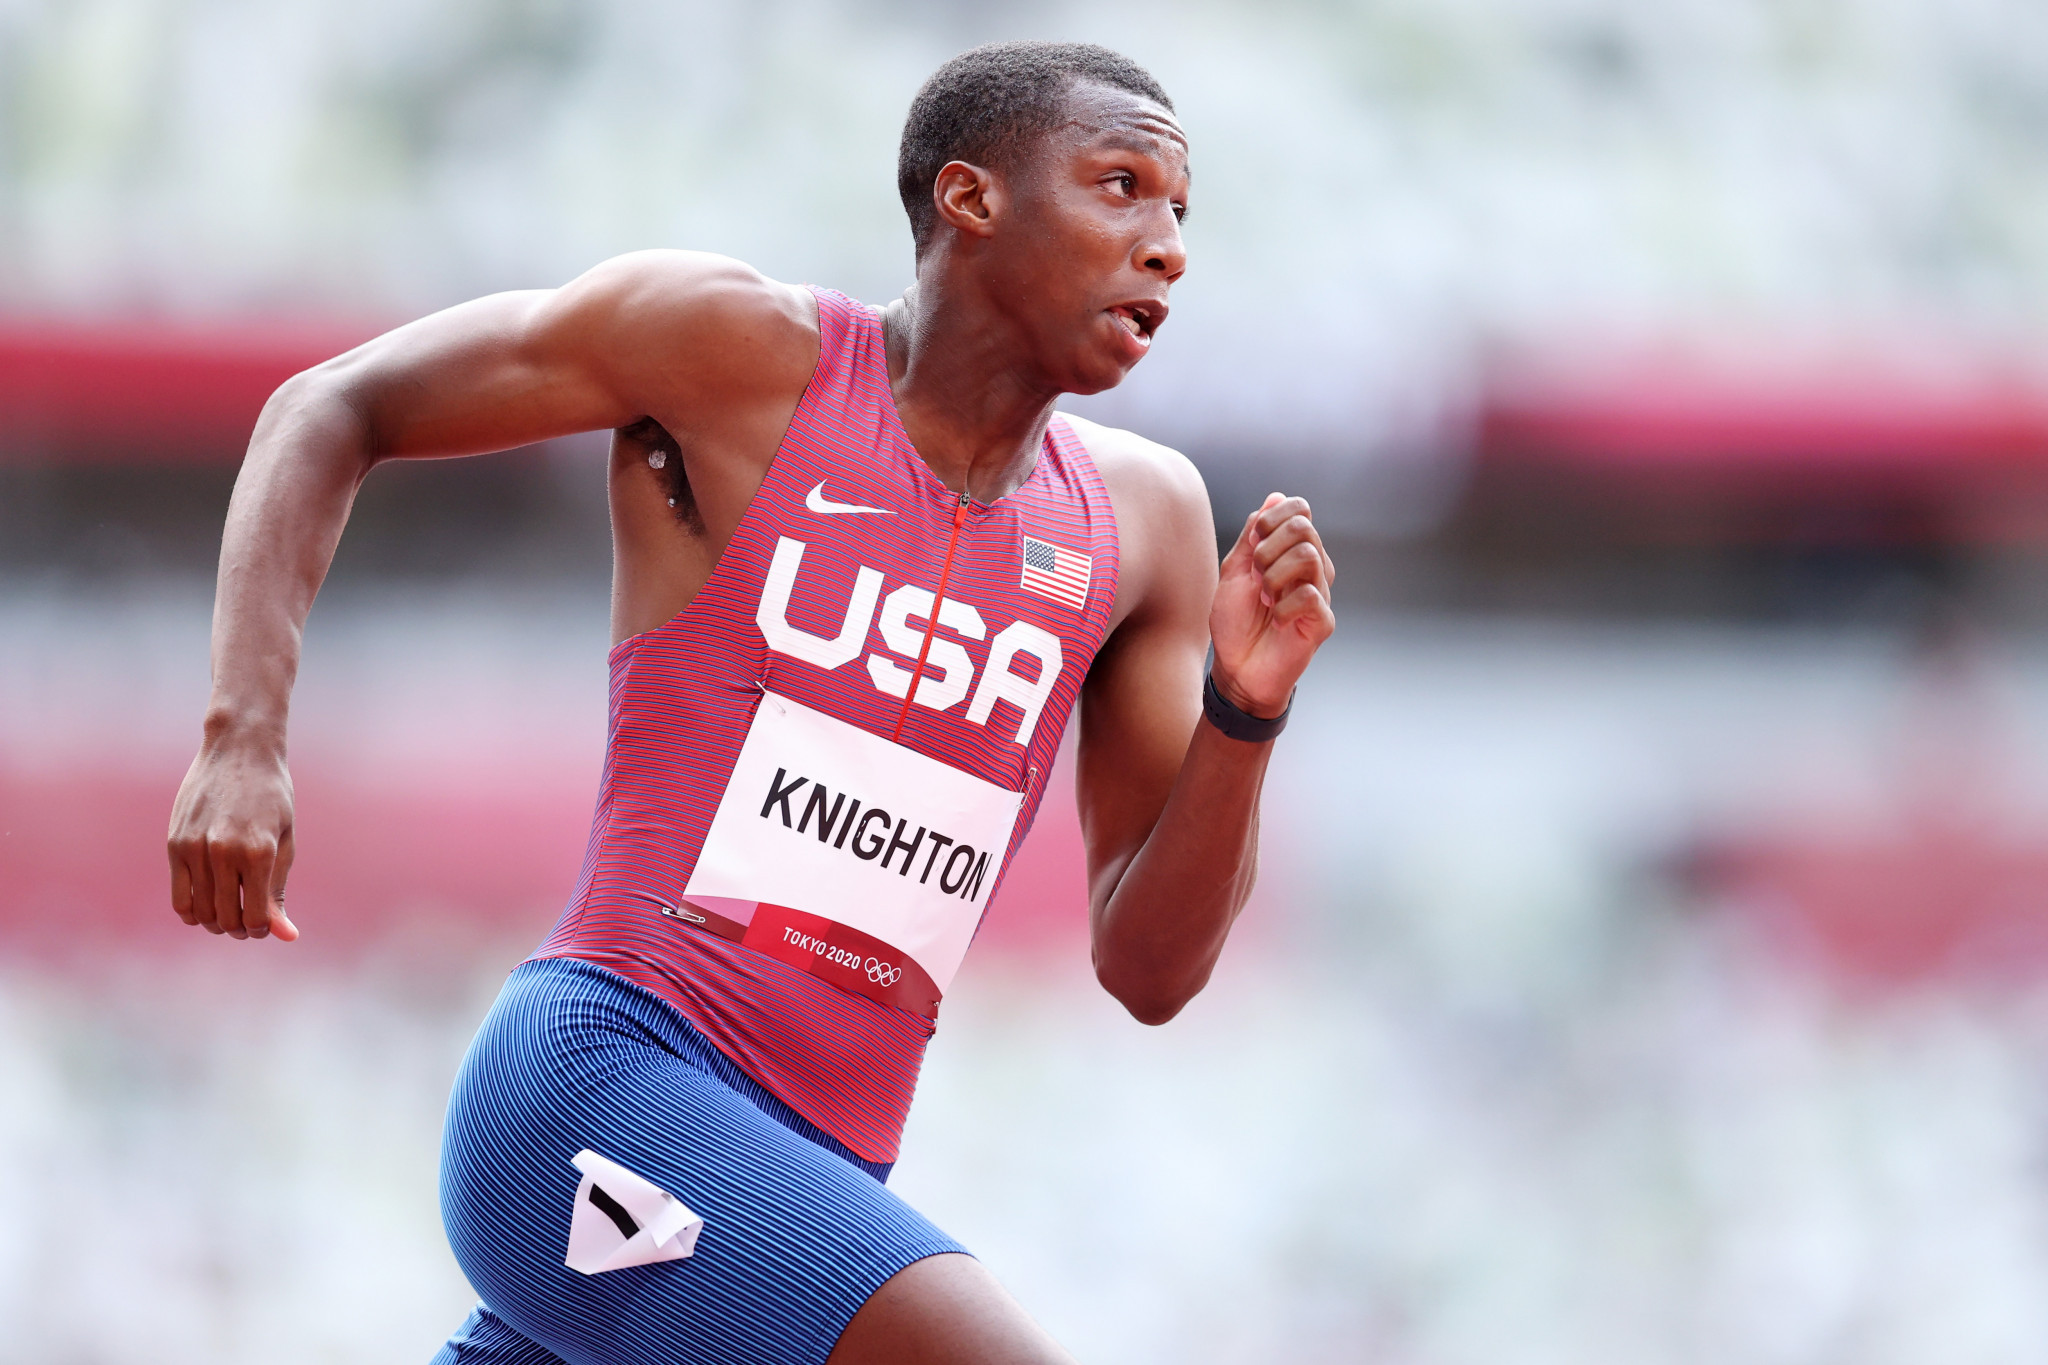 United States sprinter Erriyon Knighton, who broke Usain Bolt's world under-20 record in the 200m, heads the shortlist for the World Athletics Male Rising Star Award ©Getty Images